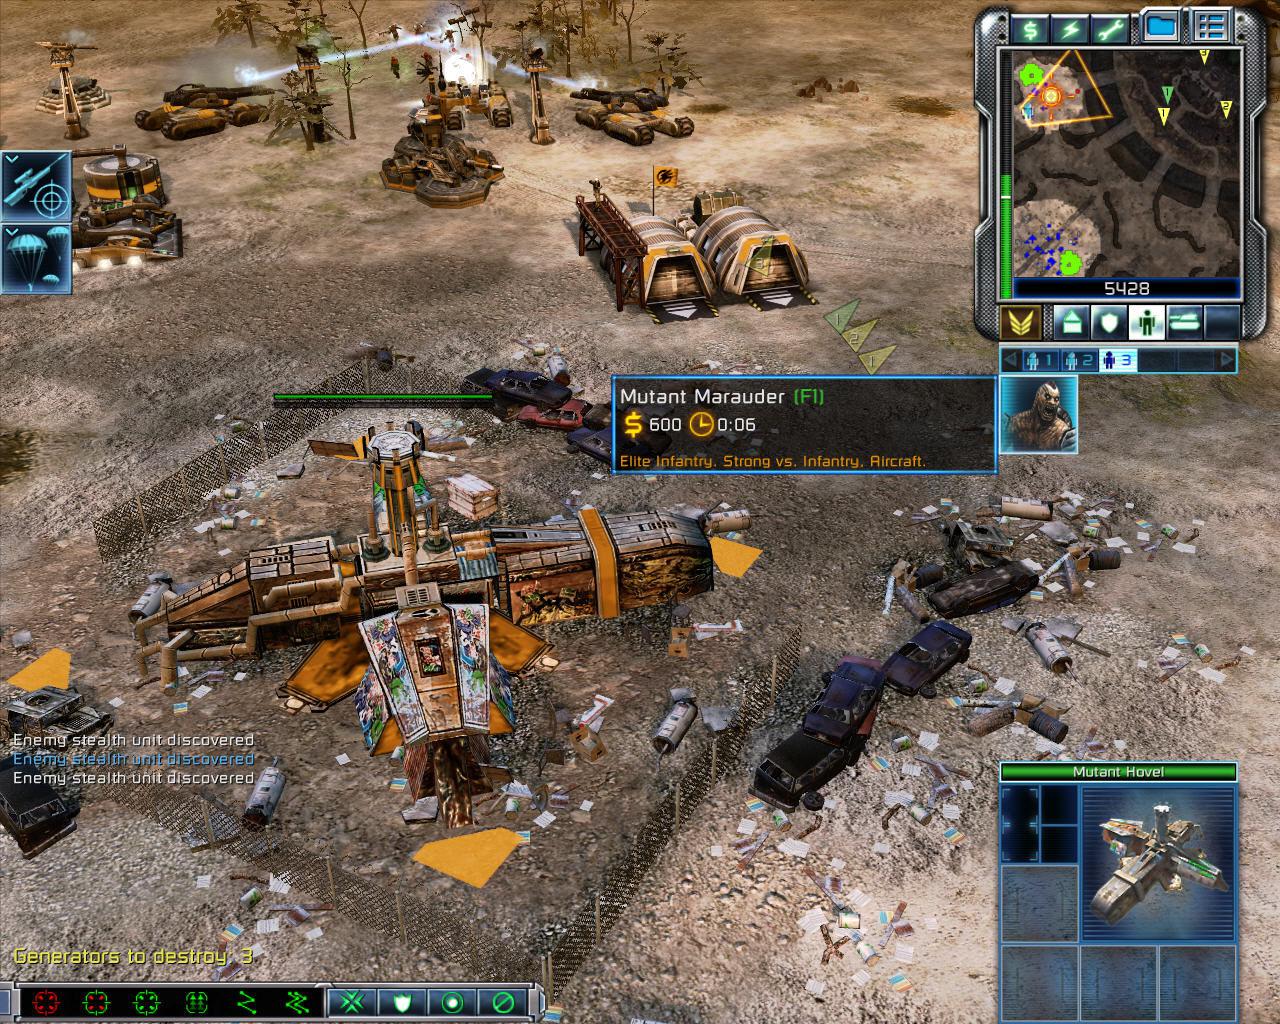 Command and Conquer 3 мародёр. Command and Conquer забытые. Command & Conquer 3: Tiberium Wars. Чит коды на игру Command and Conquer 3 Tiberium Wars.